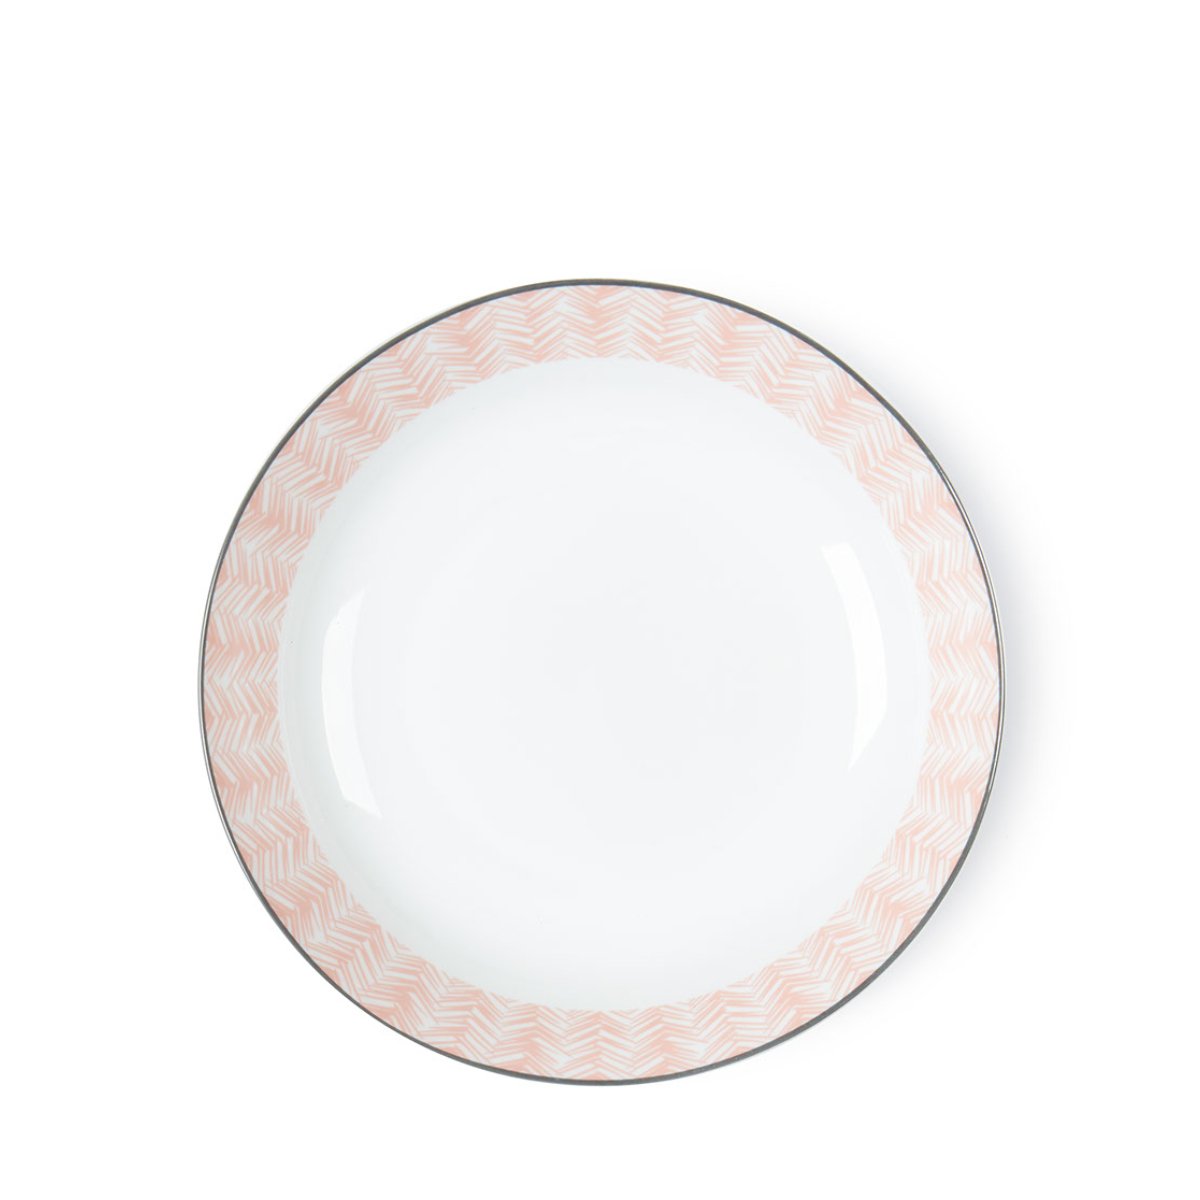 Add some style to your dining table with our modern Mali Decal pasta bowl set. It features an eye-catching geometric pattern, it is perfect for everyday dining and special occasions. Made from porcelain, it includes four place settings and is microwave and dishwasher safe for added convenience. Matching 12-piece matching dinner set is also available